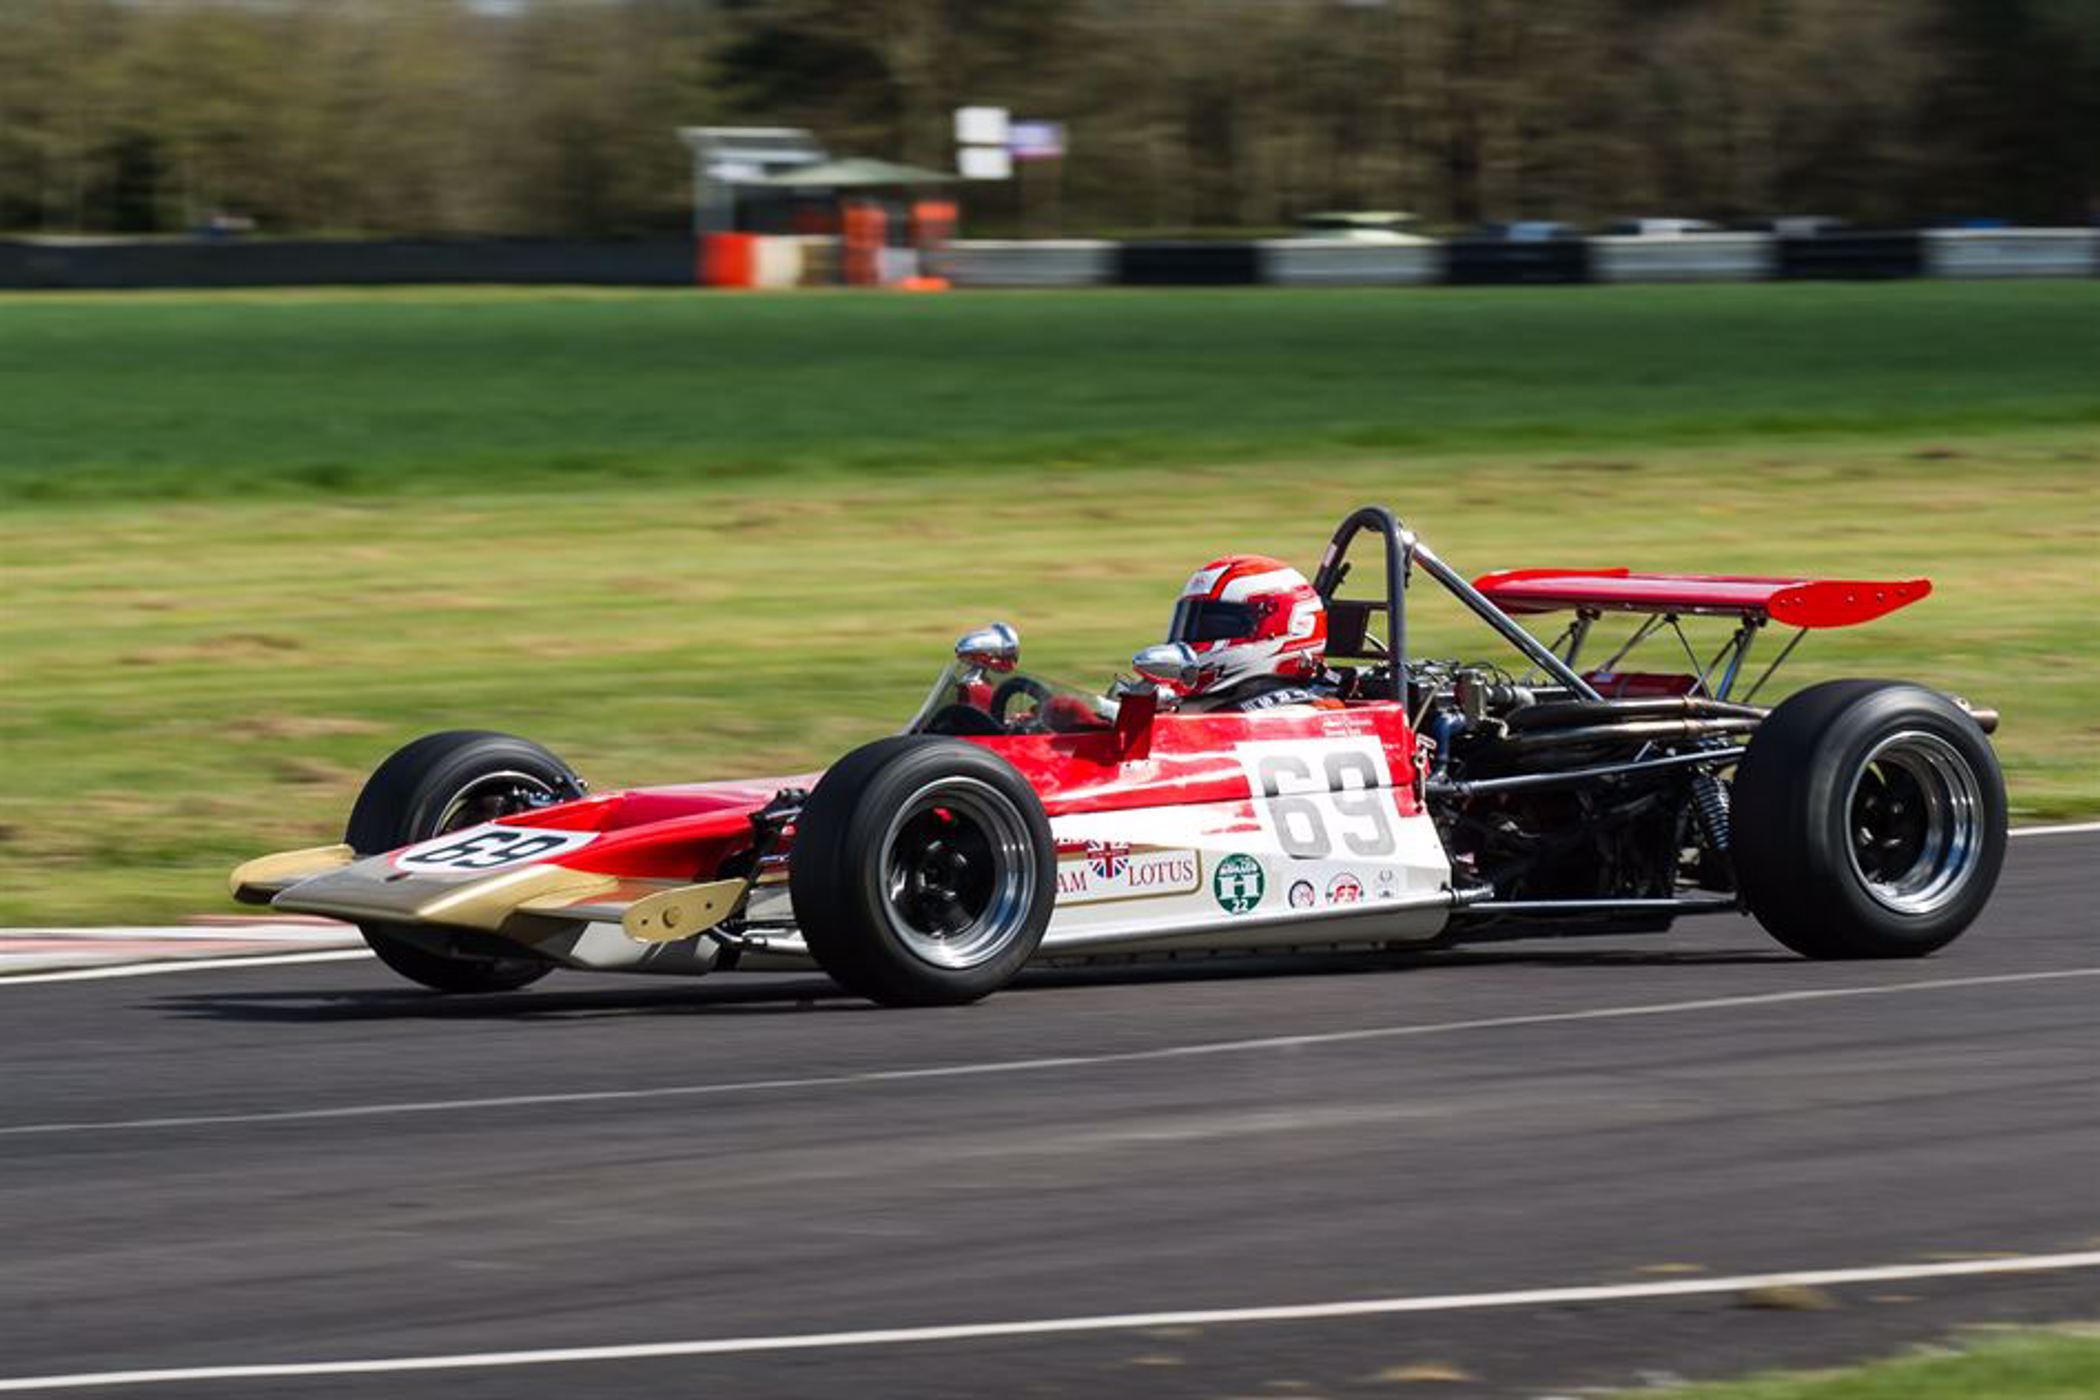 Historic racing at the HSCC Autumn Classic at Castle Combe circuit